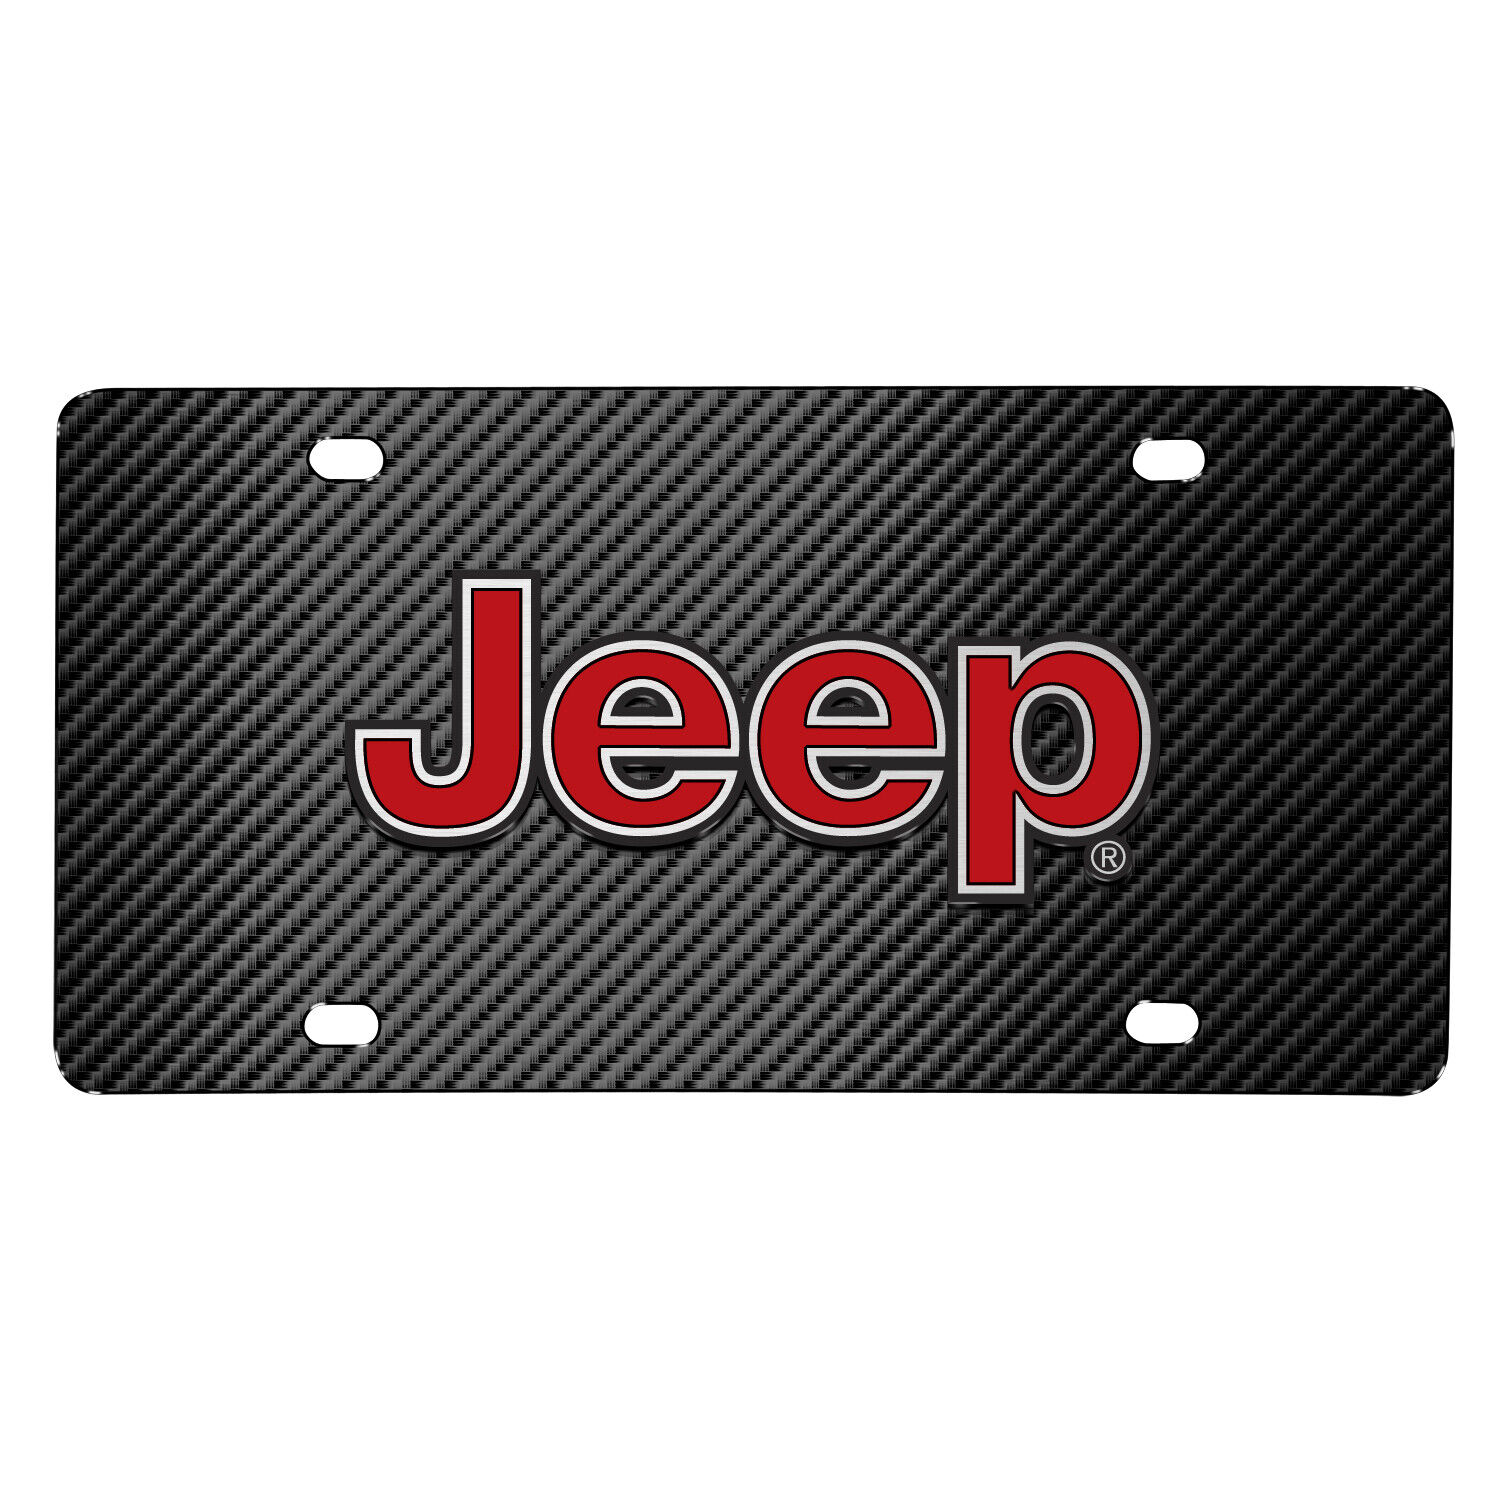 Jeep in Red 3D Logo on Black Carbon Fiber Patten Stainless Steel License Plate